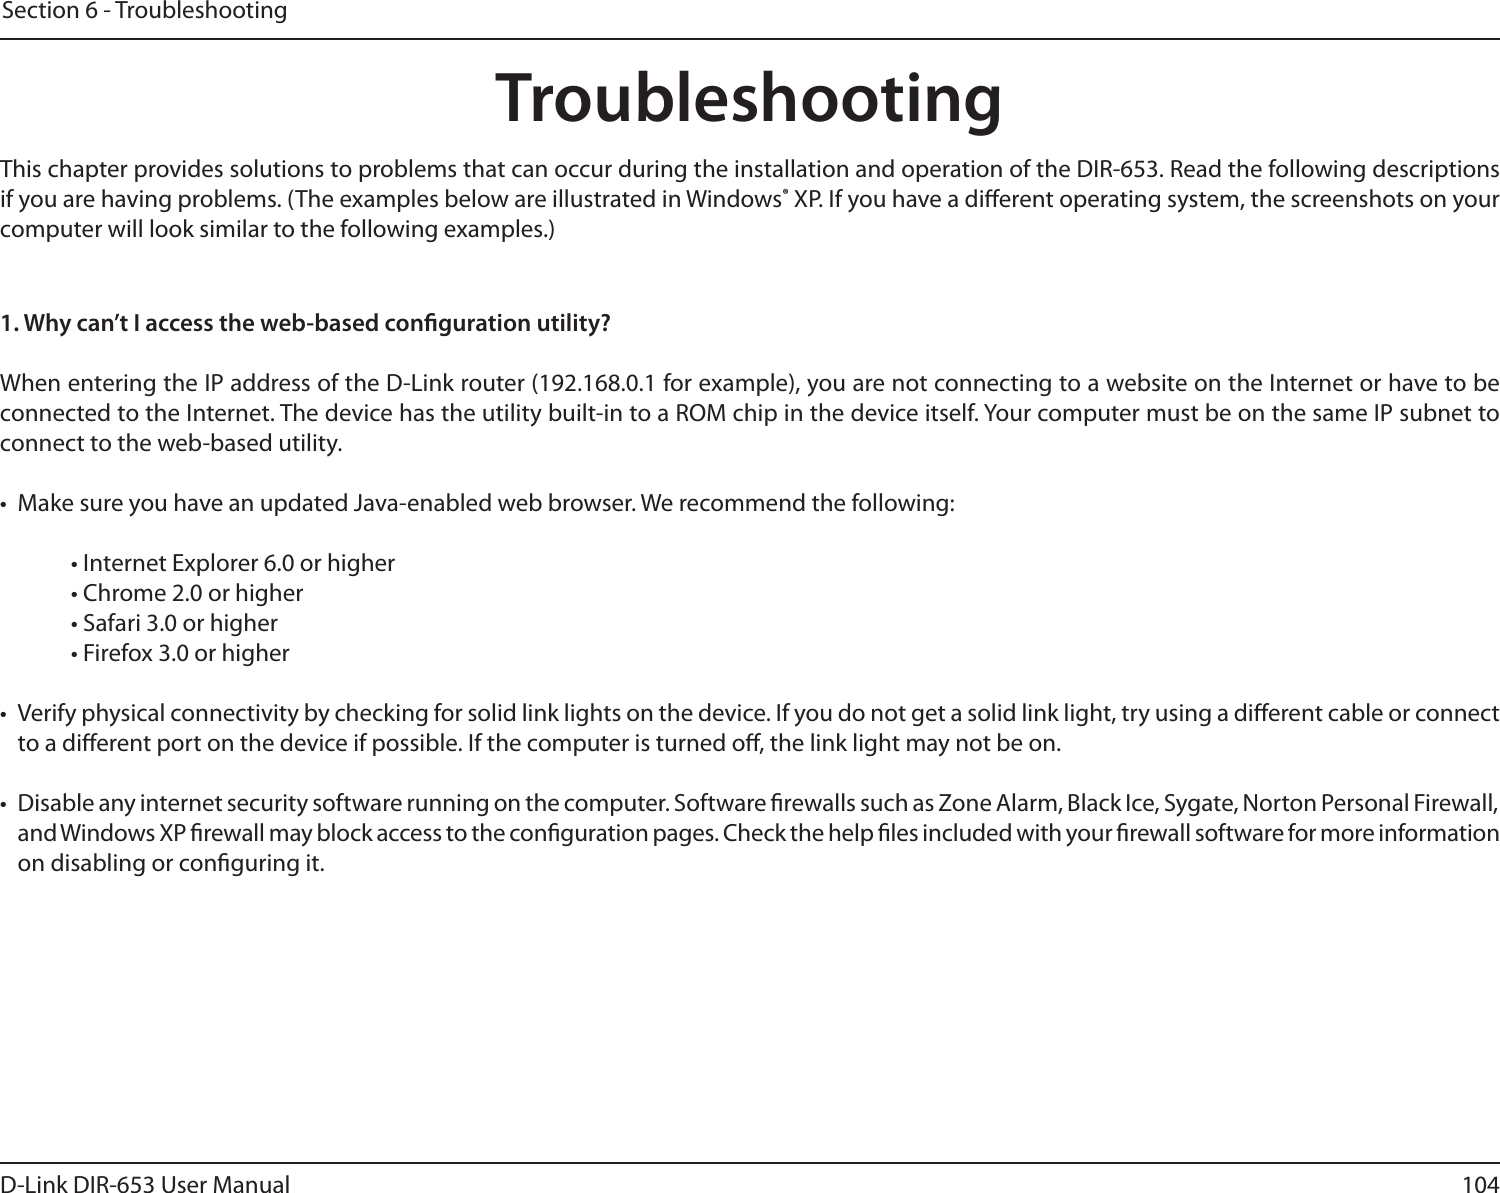 104D-Link DIR-653 User ManualSection 6 - TroubleshootingTroubleshootingThis chapter provides solutions to problems that can occur during the installation and operation of the DIR-653. Read the following descriptions if you are having problems. (The examples below are illustrated in Windows® XP. If you have a dierent operating system, the screenshots on your computer will look similar to the following examples.)1. Why can’t I access the web-based conguration utility?When entering the IP address of the D-Link router (192.168.0.1 for example), you are not connecting to a website on the Internet or have to be connected to the Internet. The device has the utility built-in to a ROM chip in the device itself. Your computer must be on the same IP subnet to connect to the web-based utility. •  Make sure you have an updated Java-enabled web browser. We recommend the following: • Internet Explorer 6.0 or higher • Chrome 2.0 or higher • Safari 3.0 or higher • Firefox 3.0 or higher •  Verify physical connectivity by checking for solid link lights on the device. If you do not get a solid link light, try using a dierent cable or connect to a dierent port on the device if possible. If the computer is turned o, the link light may not be on.•  Disable any internet security software running on the computer. Software rewalls such as Zone Alarm, Black Ice, Sygate, Norton Personal Firewall, and Windows XP rewall may block access to the conguration pages. Check the help les included with your rewall software for more information on disabling or conguring it.